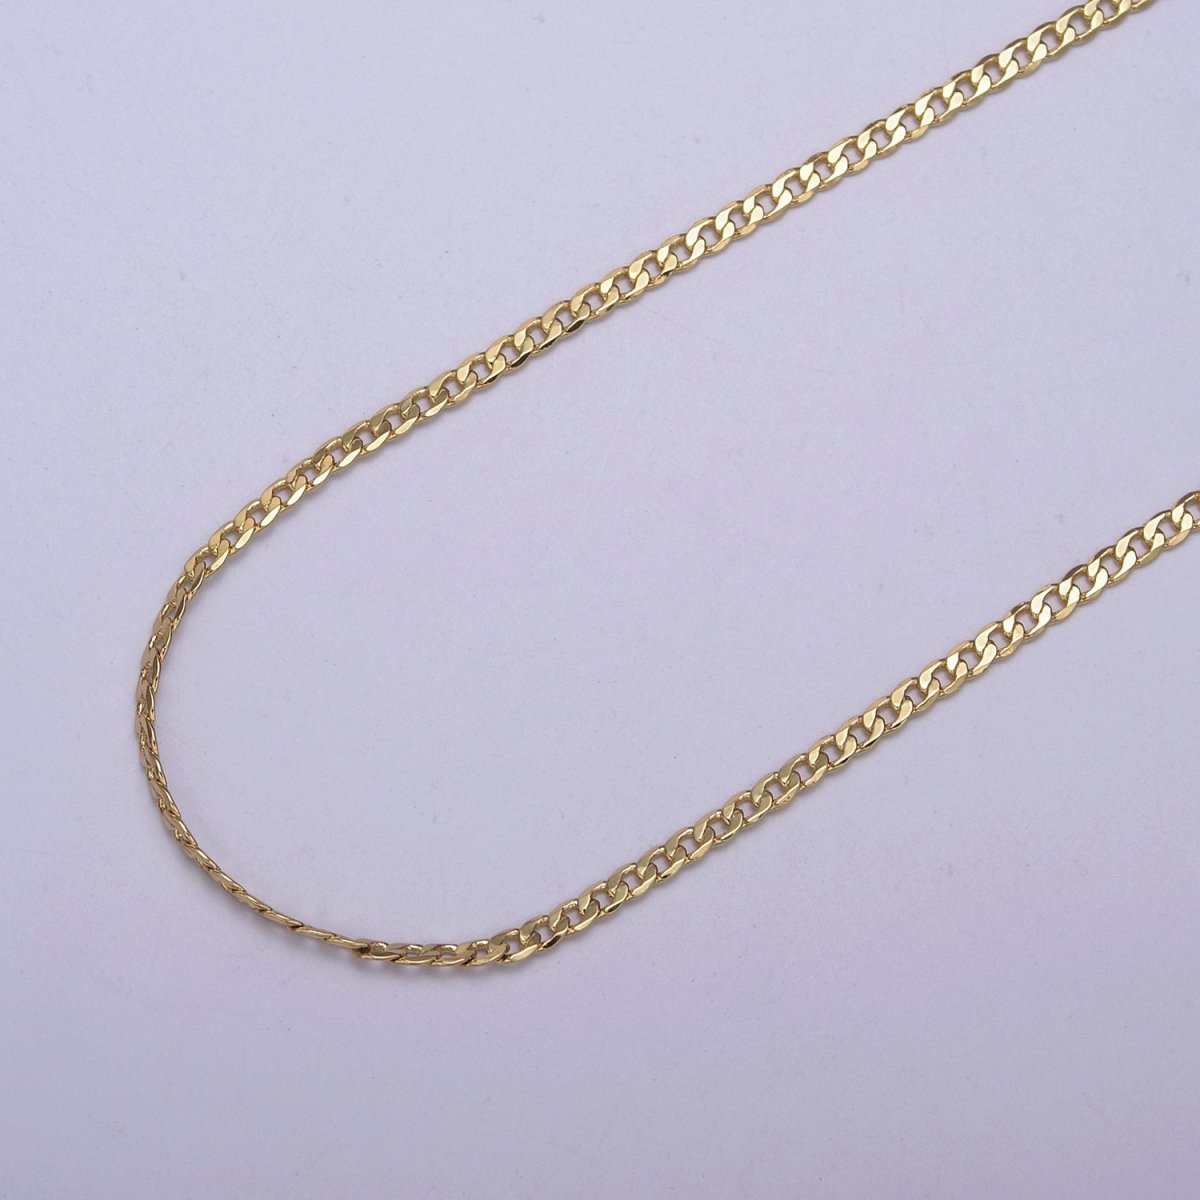 24K Gold Silver FIGARO CURB Matte Chain, 1.8mm Width, Unfinished Chain For Jewelry Making Component | ROLL-623, ROLL-624 Clearance Pricing - DLUXCA